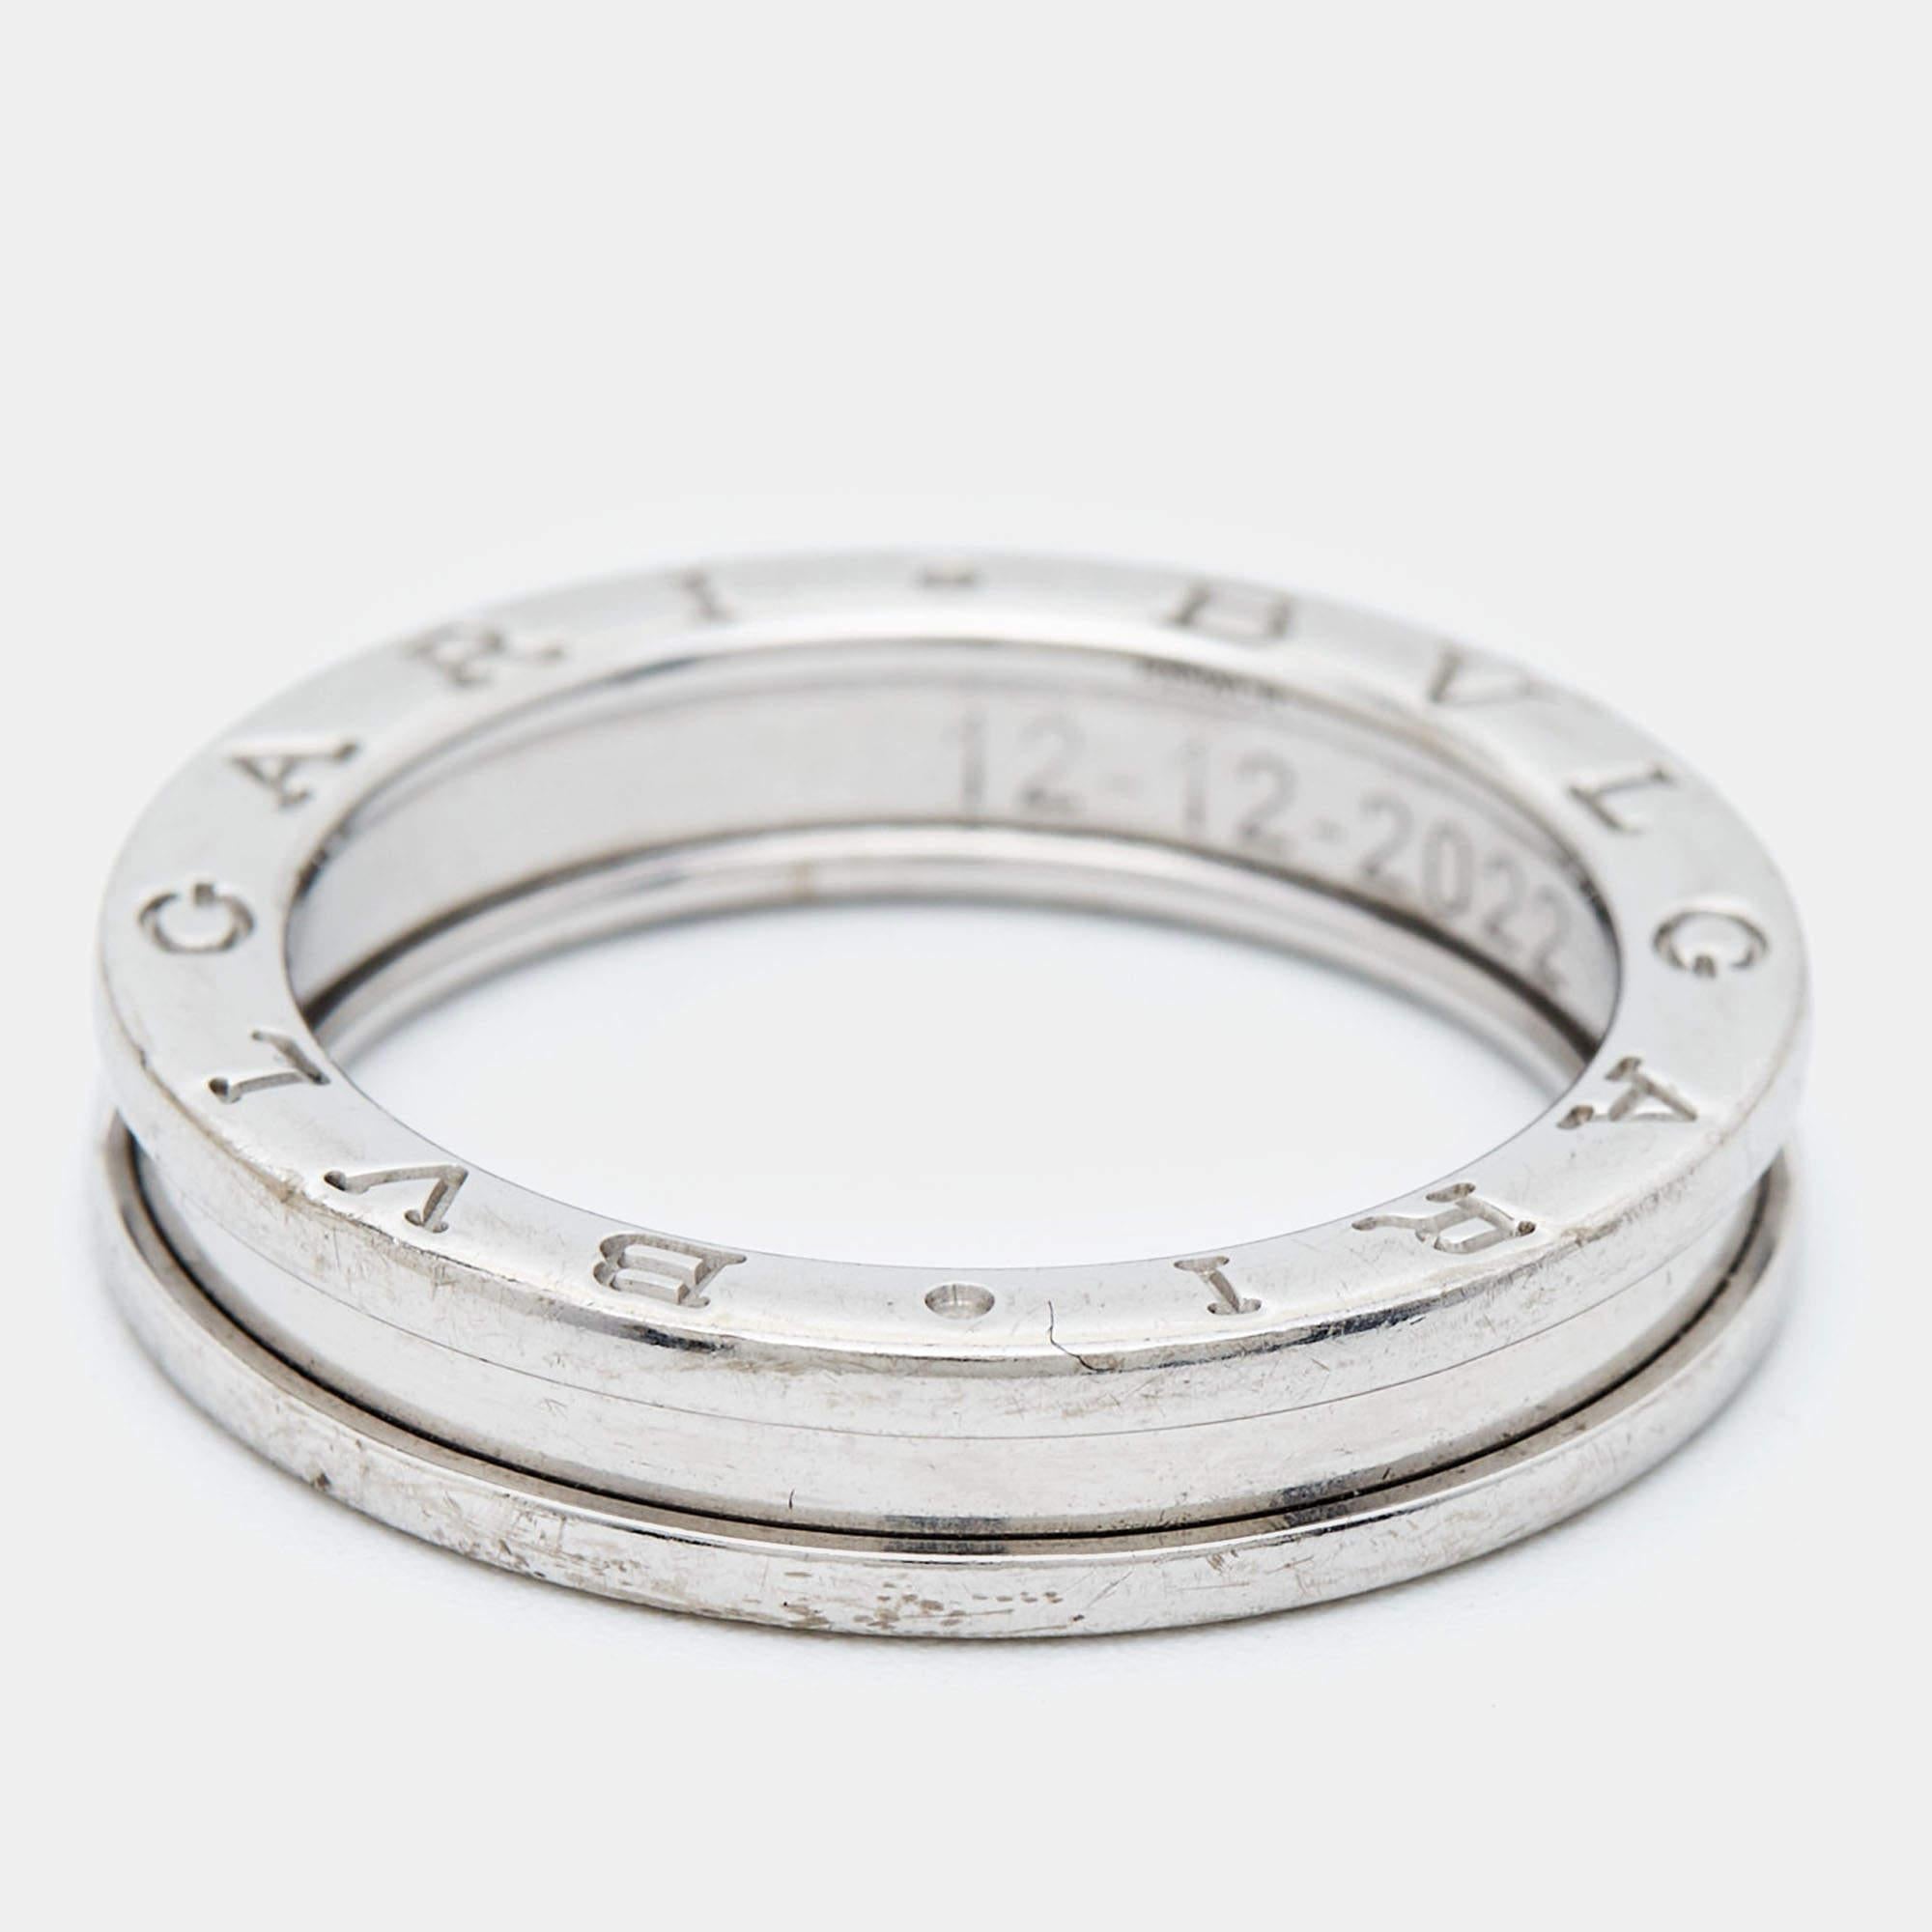 Unique and modern, this charming B.Zero1 band ring is from one of Bvlgari's iconic collections . Beautifully crafted from 18k white gold, the ring has signature engravings. Inspired by the Colosseum, this ring merges exceptional creative vision and